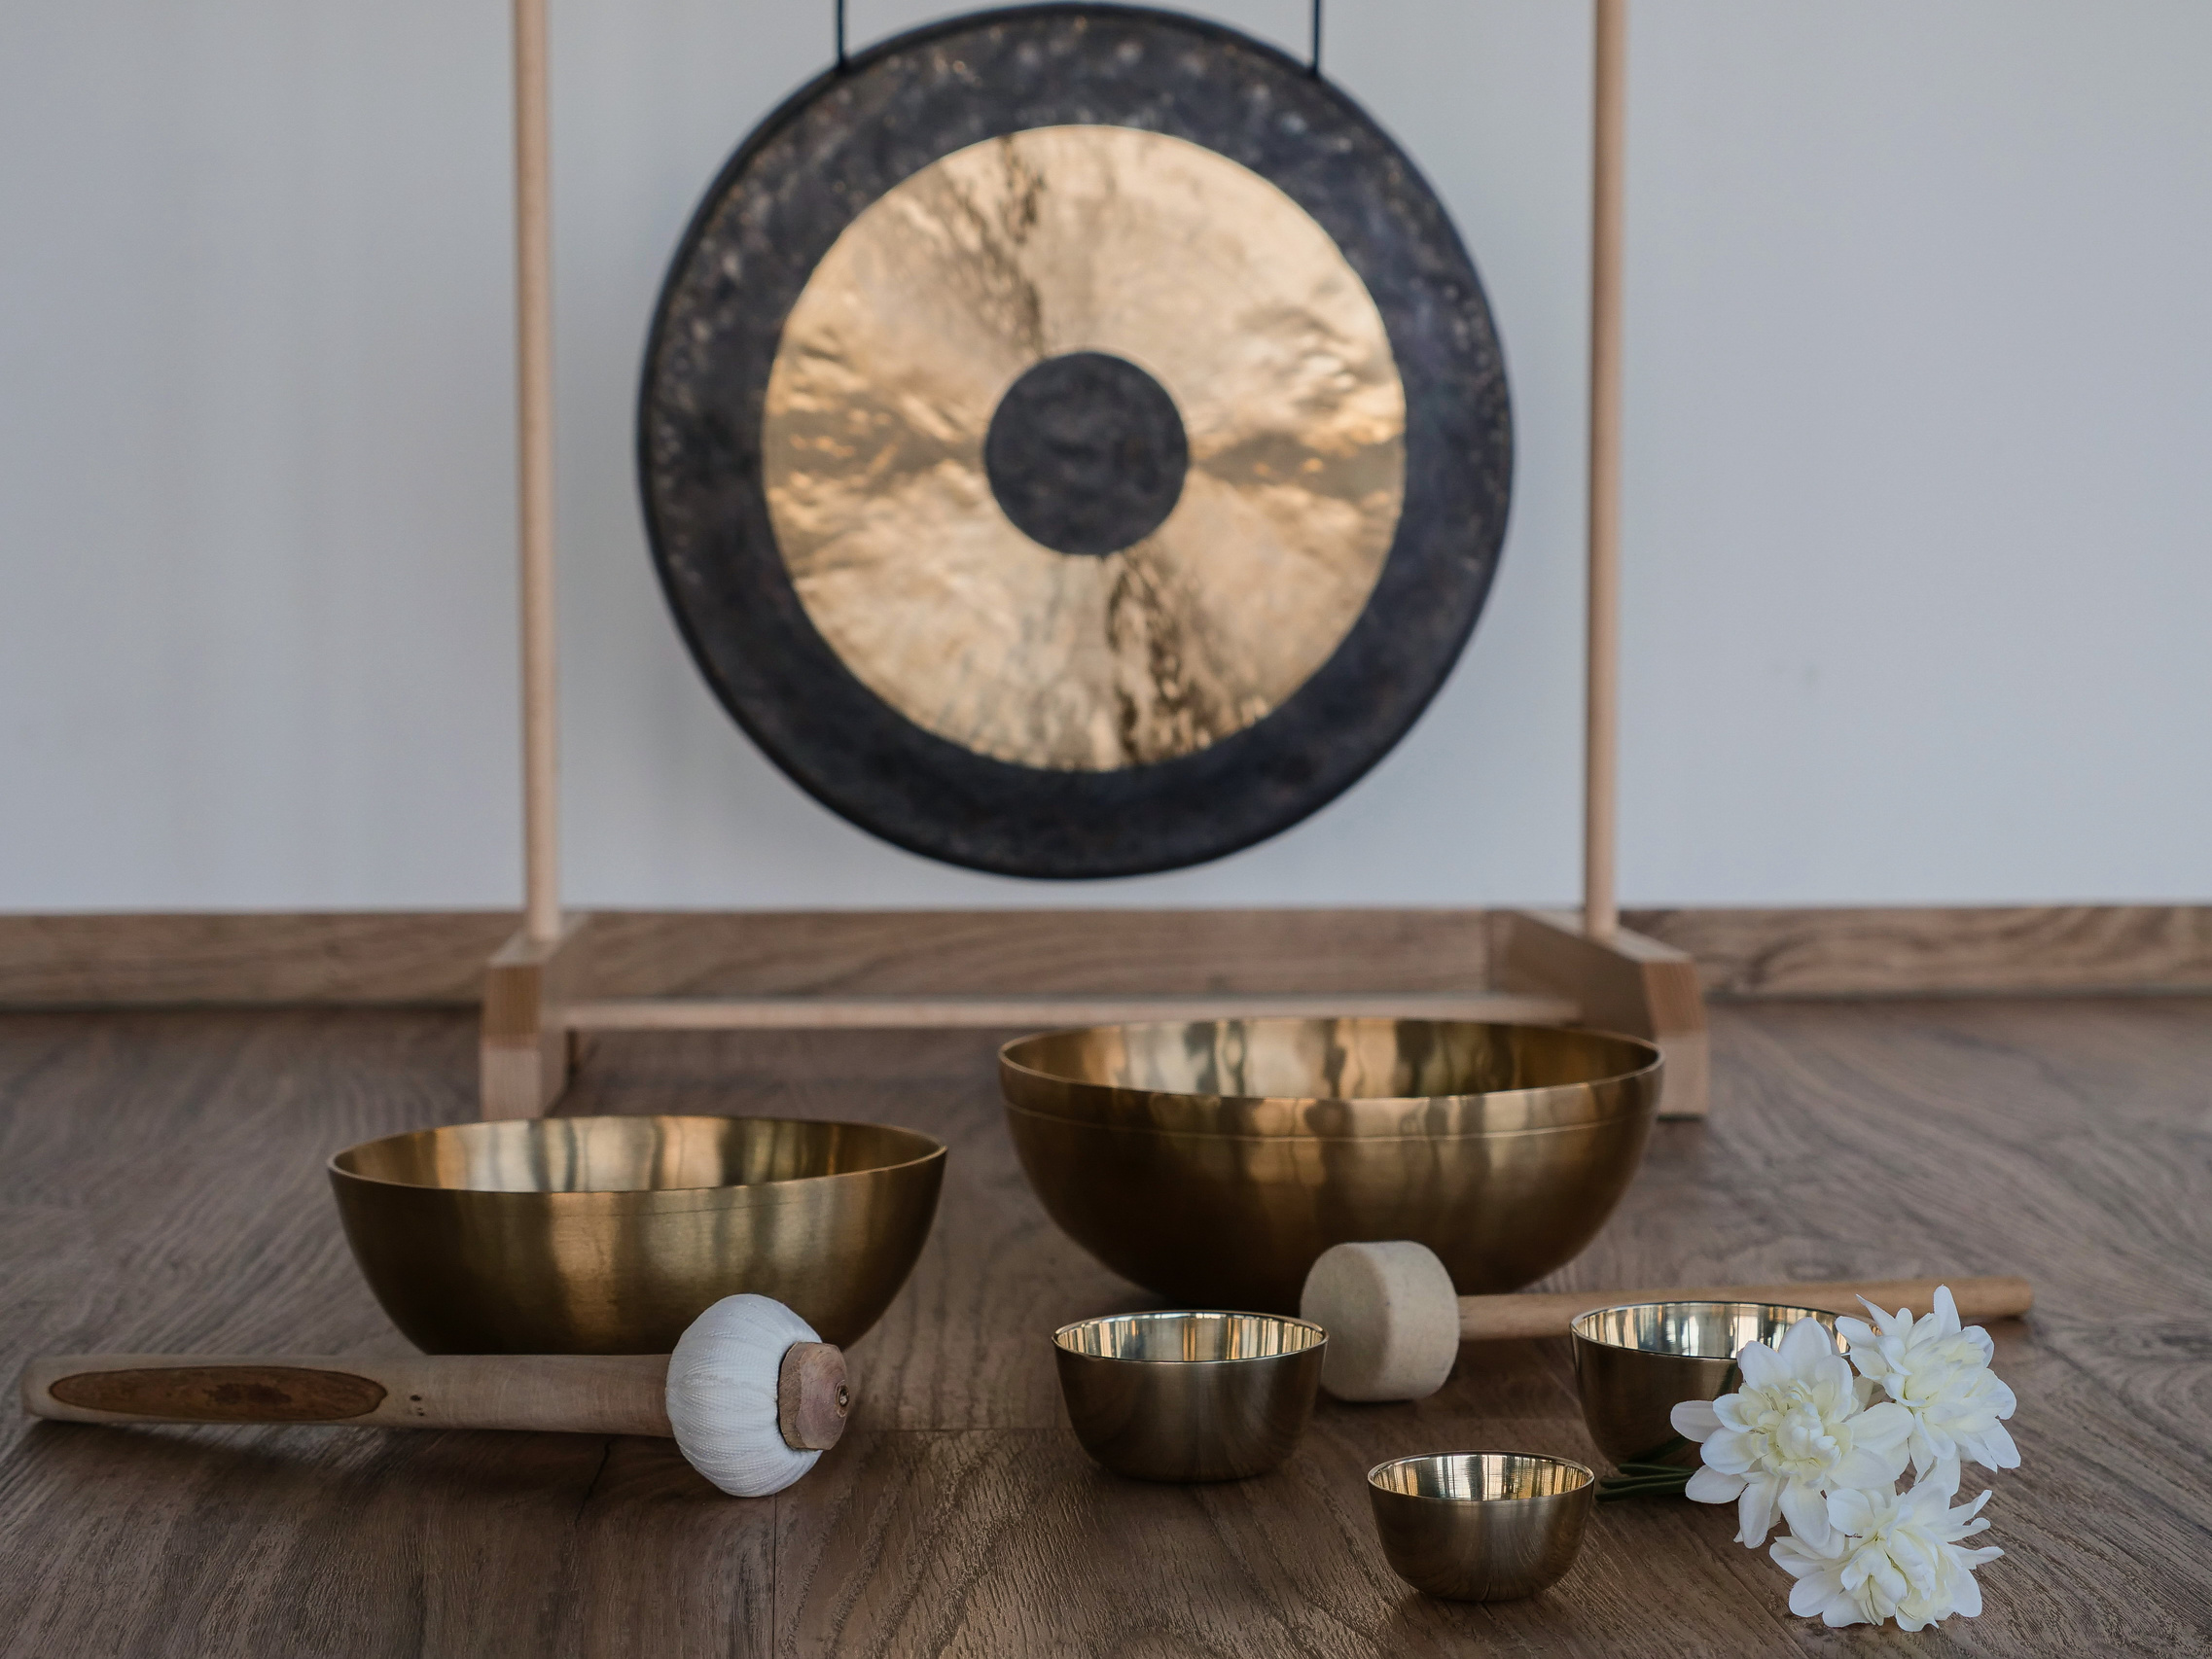 Gong and five singing bowls